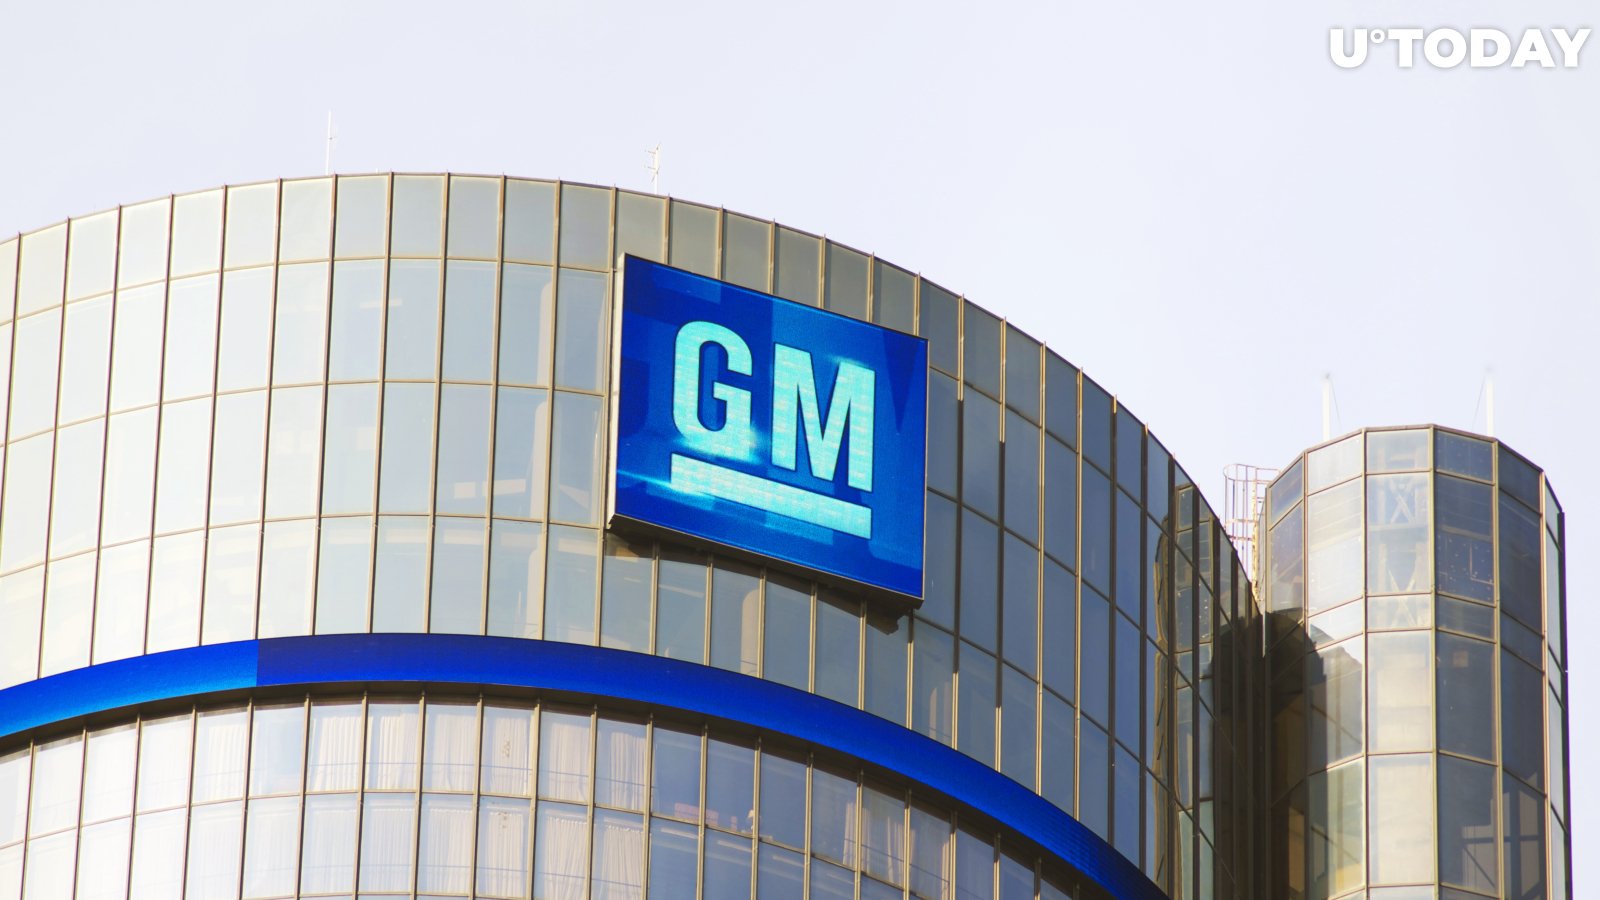 General Motors Will "Continue Evaluating" Bitcoin, Says CEO Mary Barra